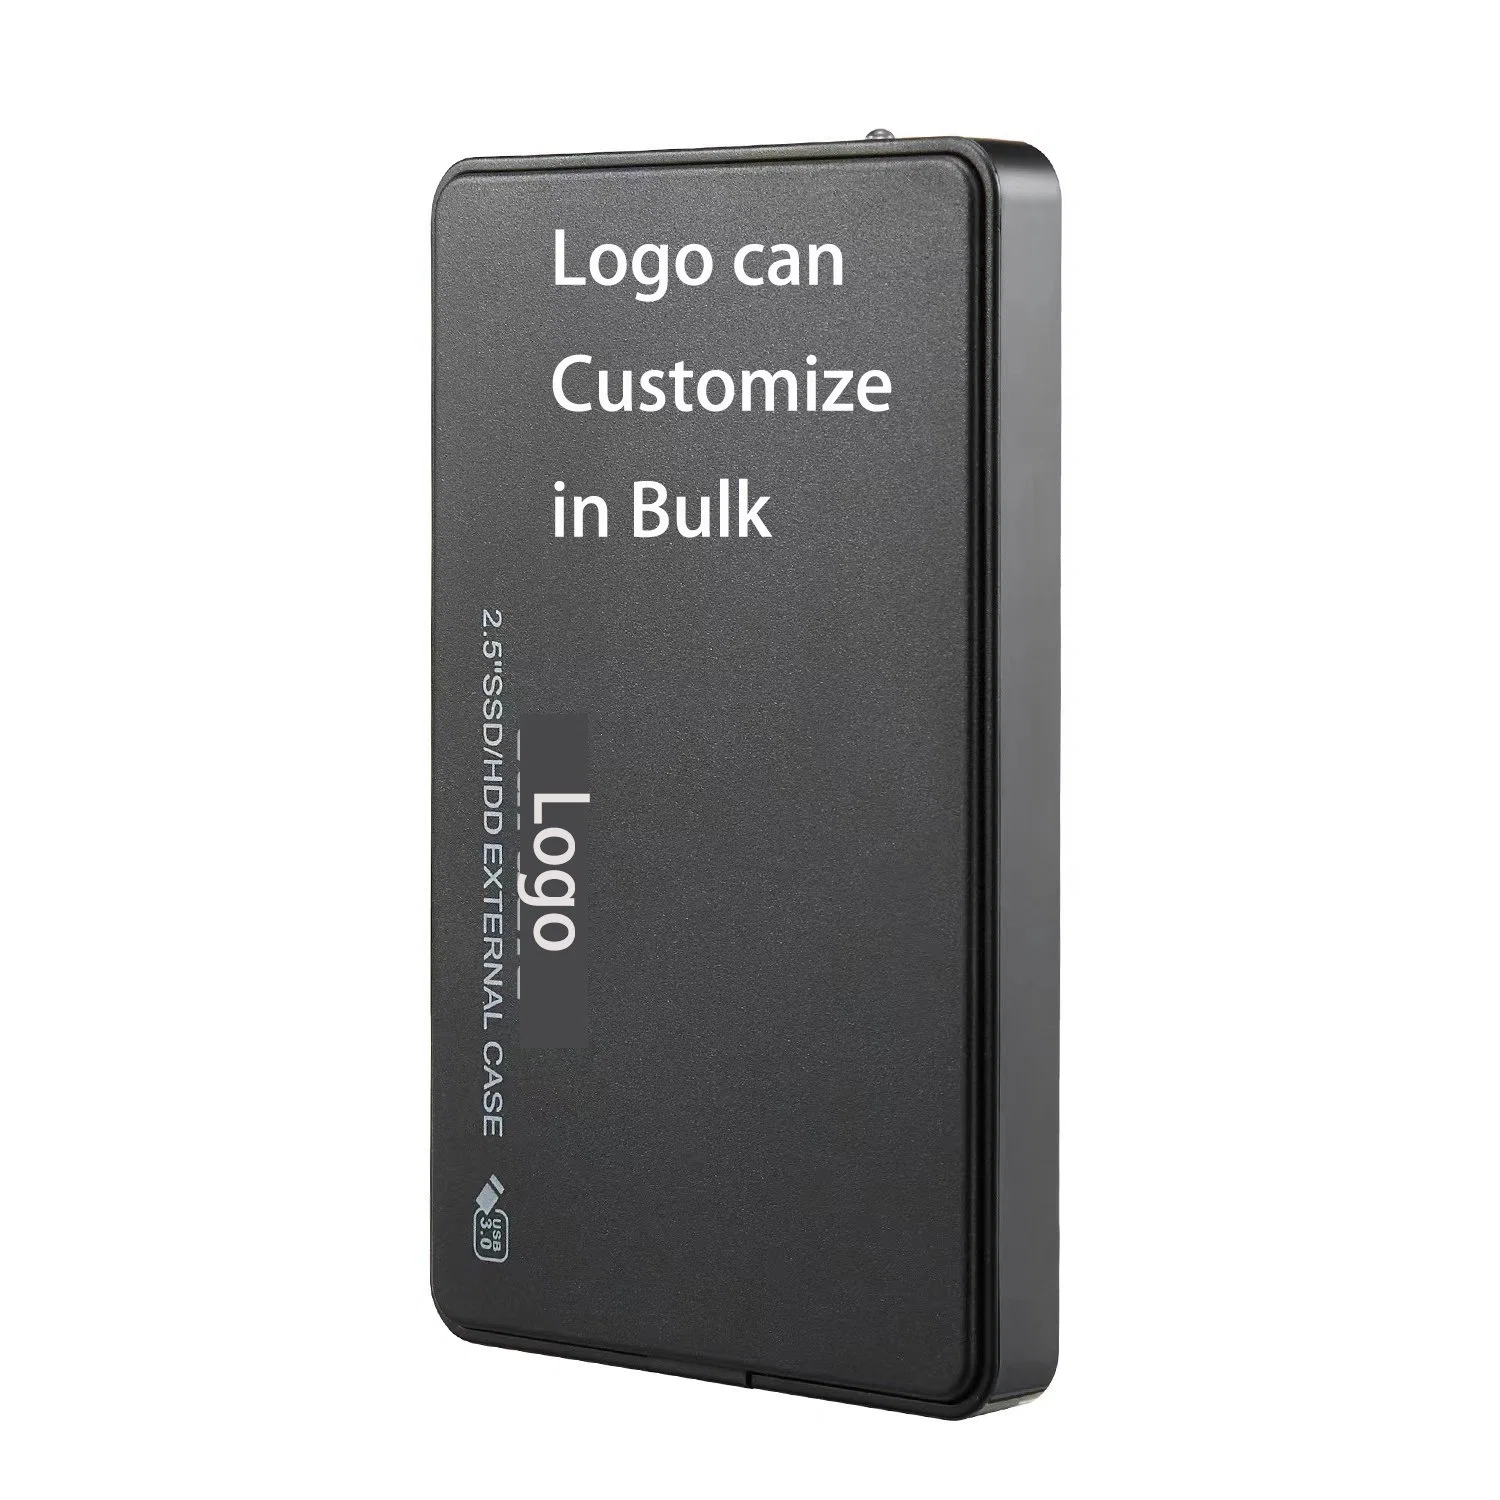 Portable 2.5" HDD Hard Drive 500GB 1tb 2tb OEM (Logo can Customize in Bulk) USB 3.0 External Hard Drive 2.5 Inch Hard Disk for PC Computer USB 2.0 Compatible